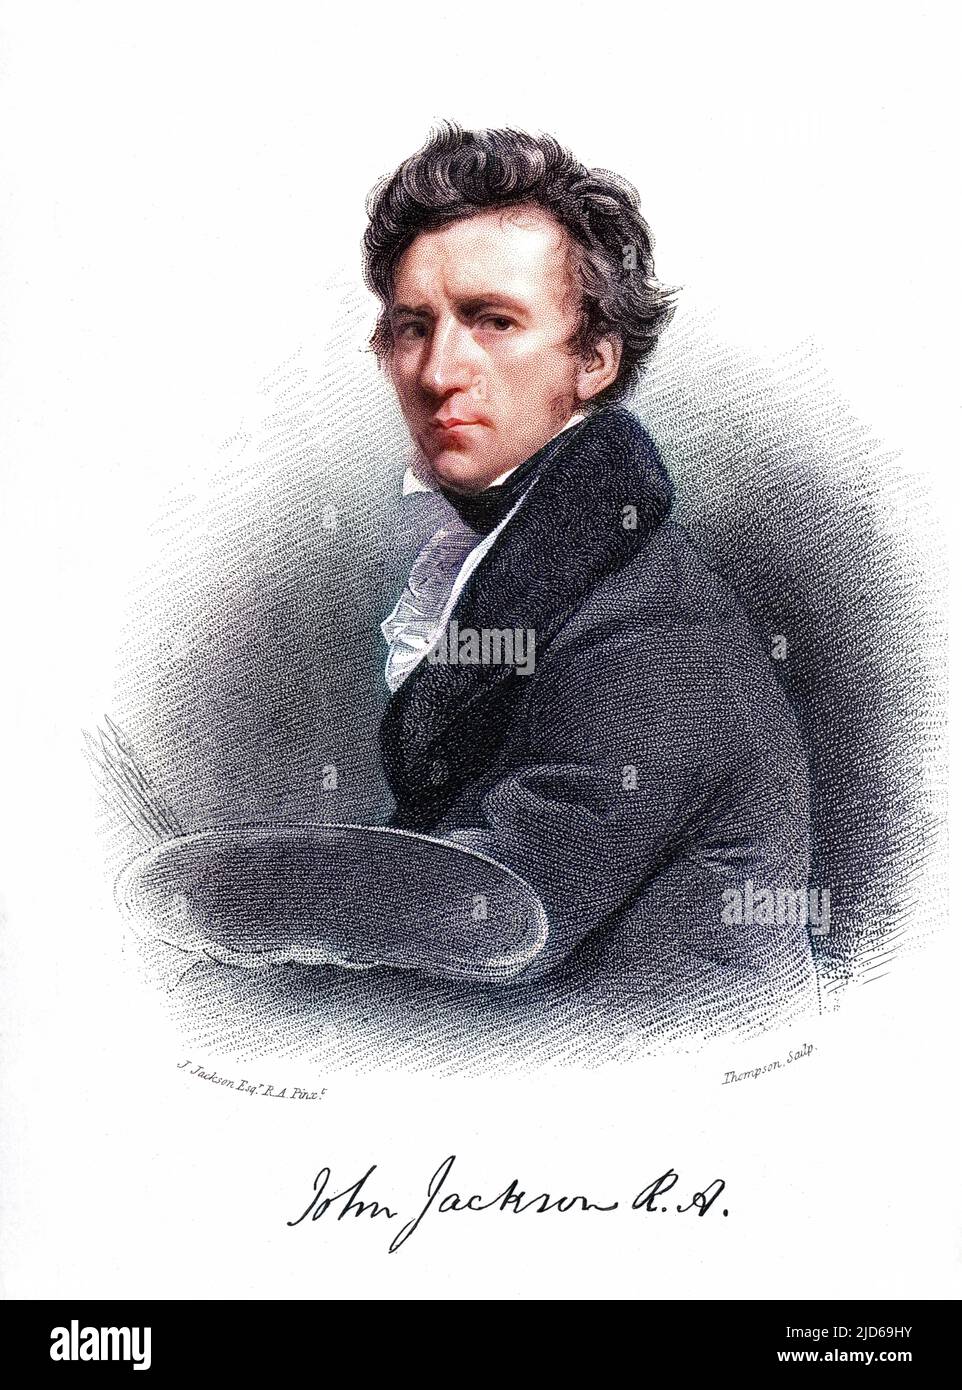 JOHN JACKSON (1778 - 1831), artist with his autograph. Colourised version of : 10161666 Stock Photo